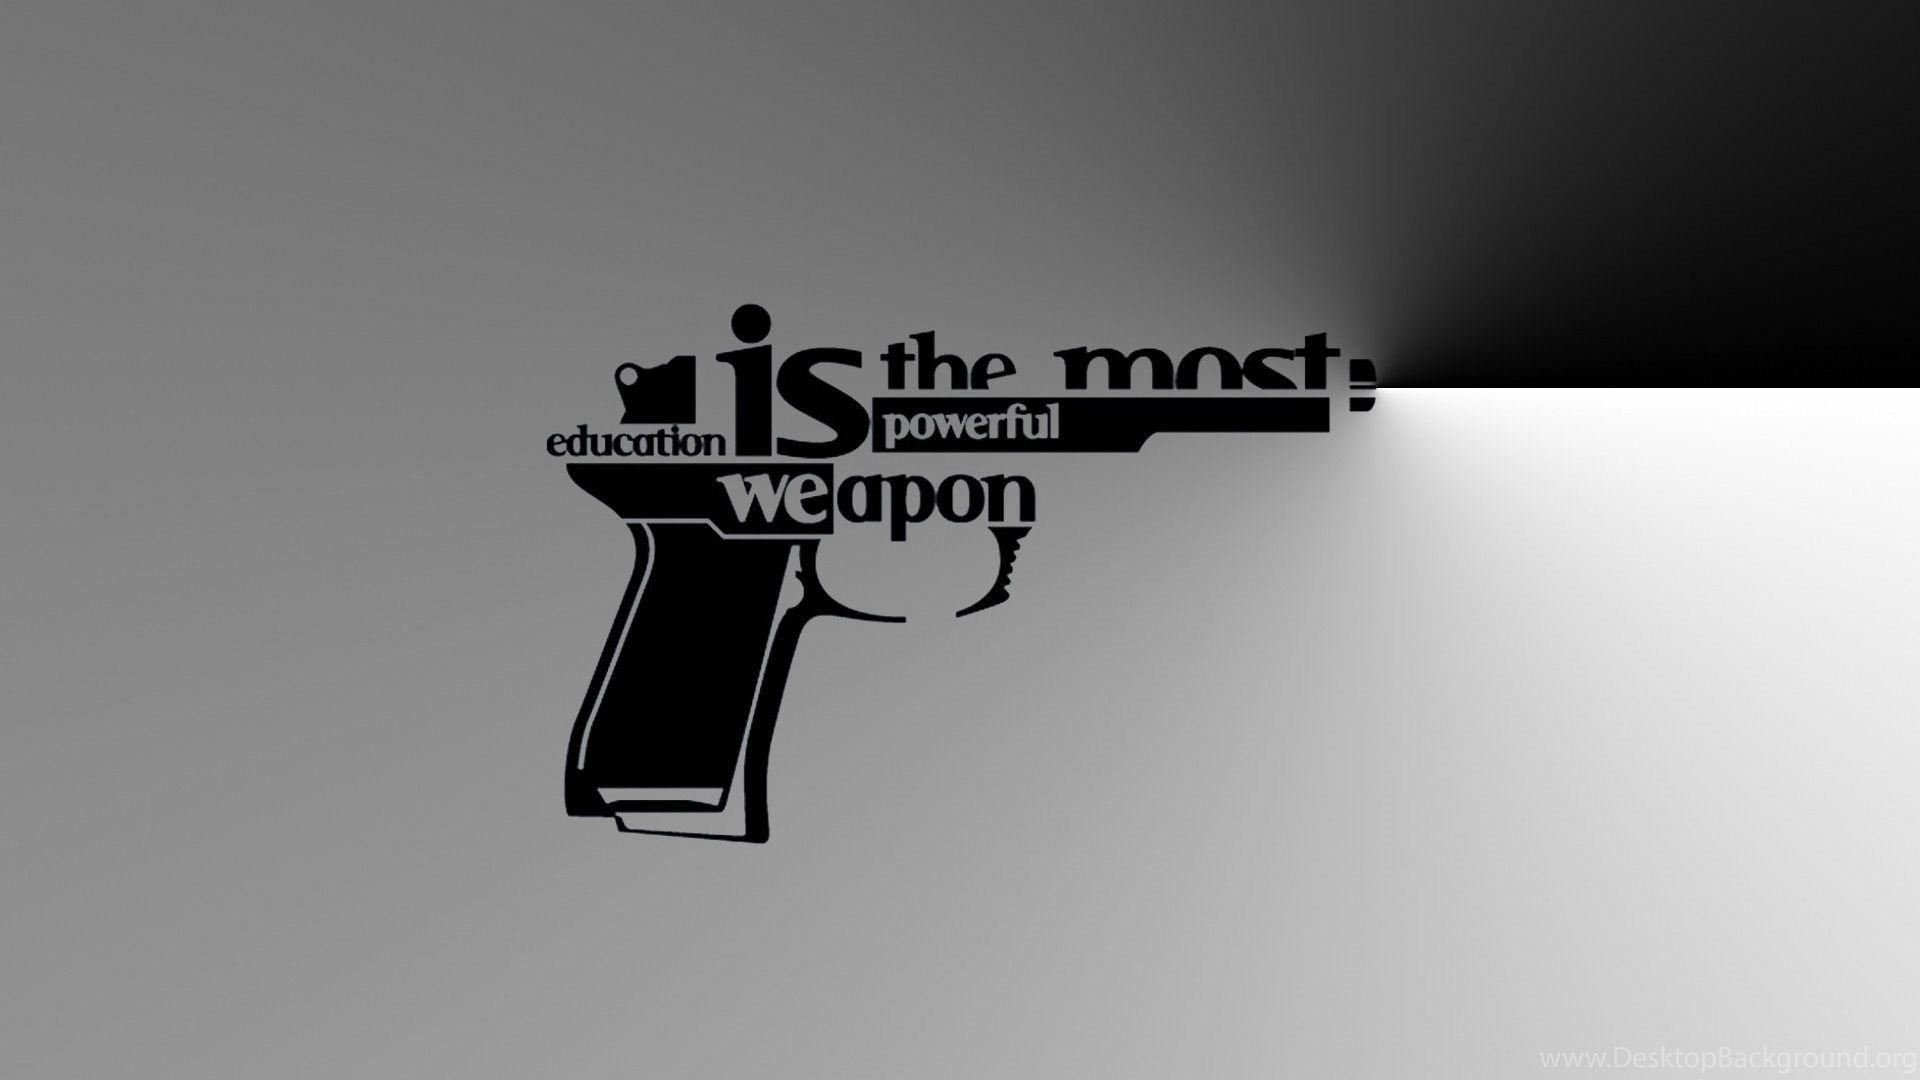 Education Is The Most Powerful Weapon HD Wallpaper FullHDwpp